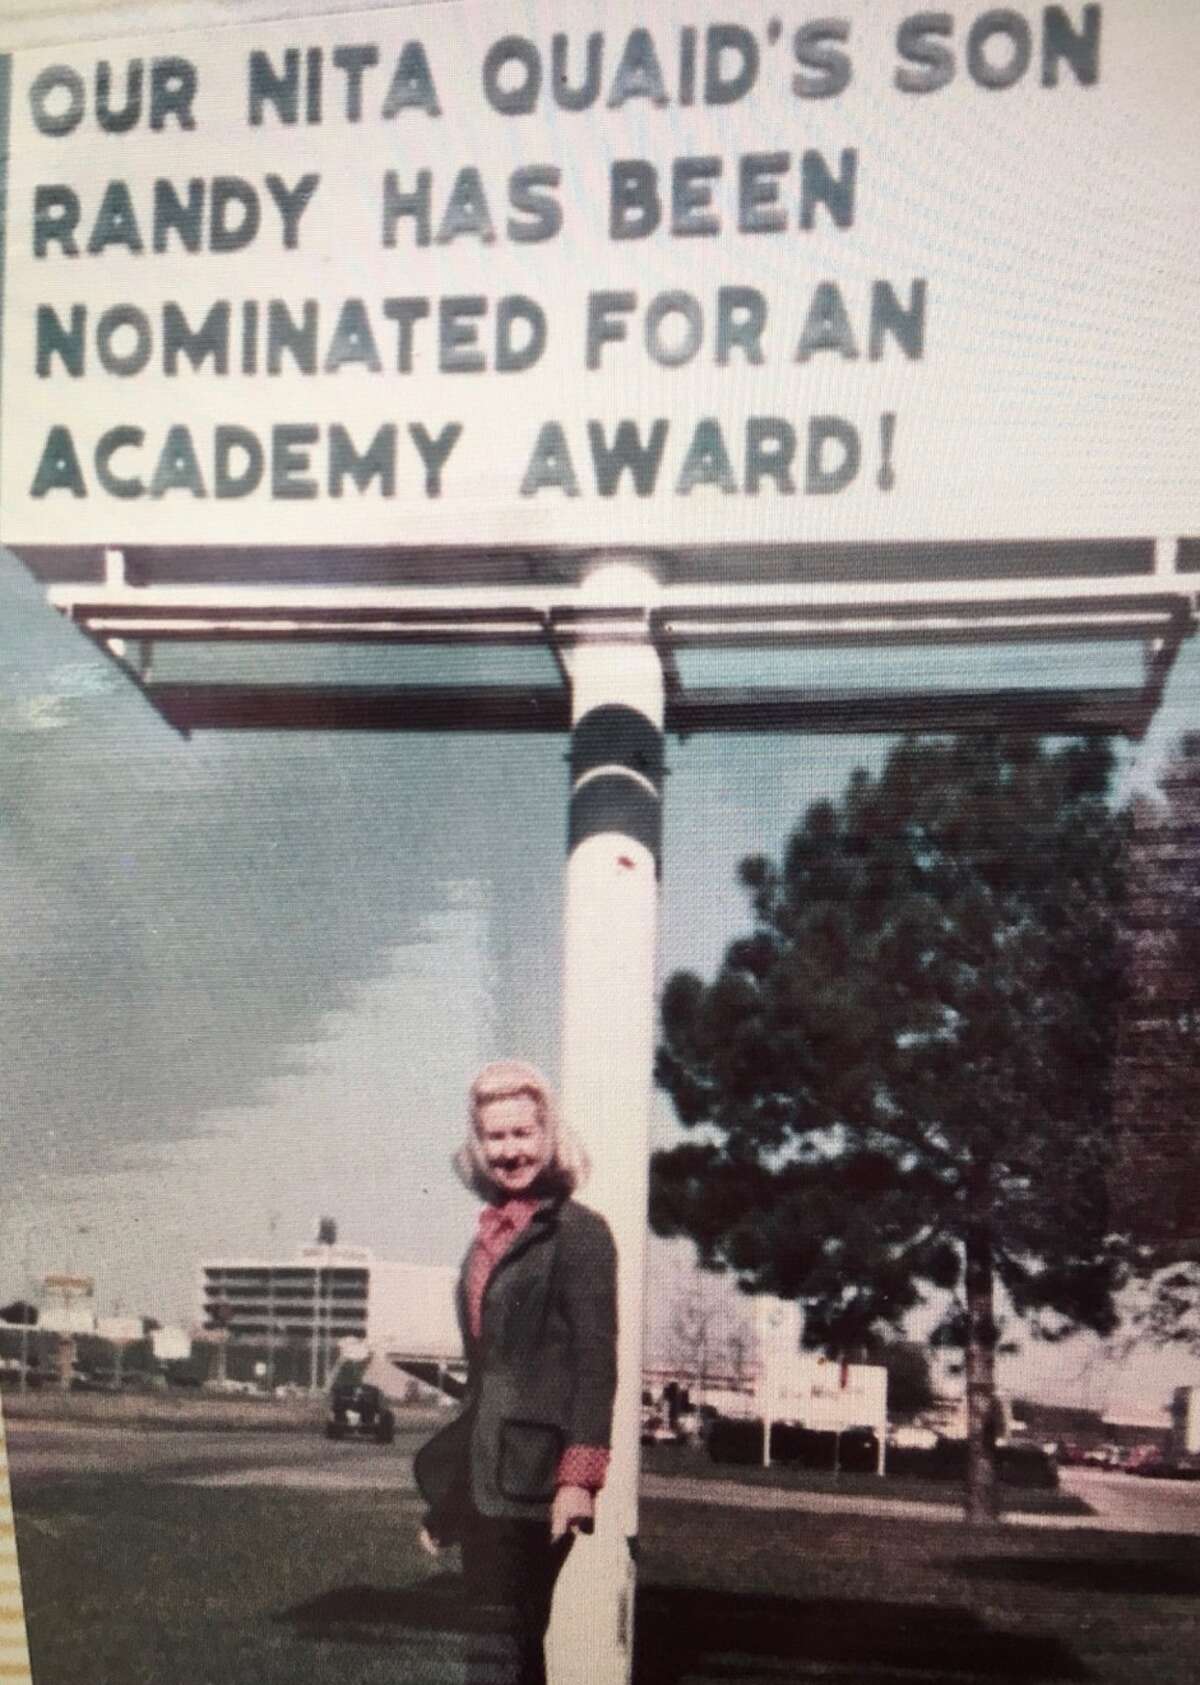 Nita Quaid poses proudly in front of a marquee reading "Our Nita Quaid's son Randy has been nominated for an Academy Award!" Randy Quaid was nominated as Best Supporting Actor for his role in 1974's The Last Detail.